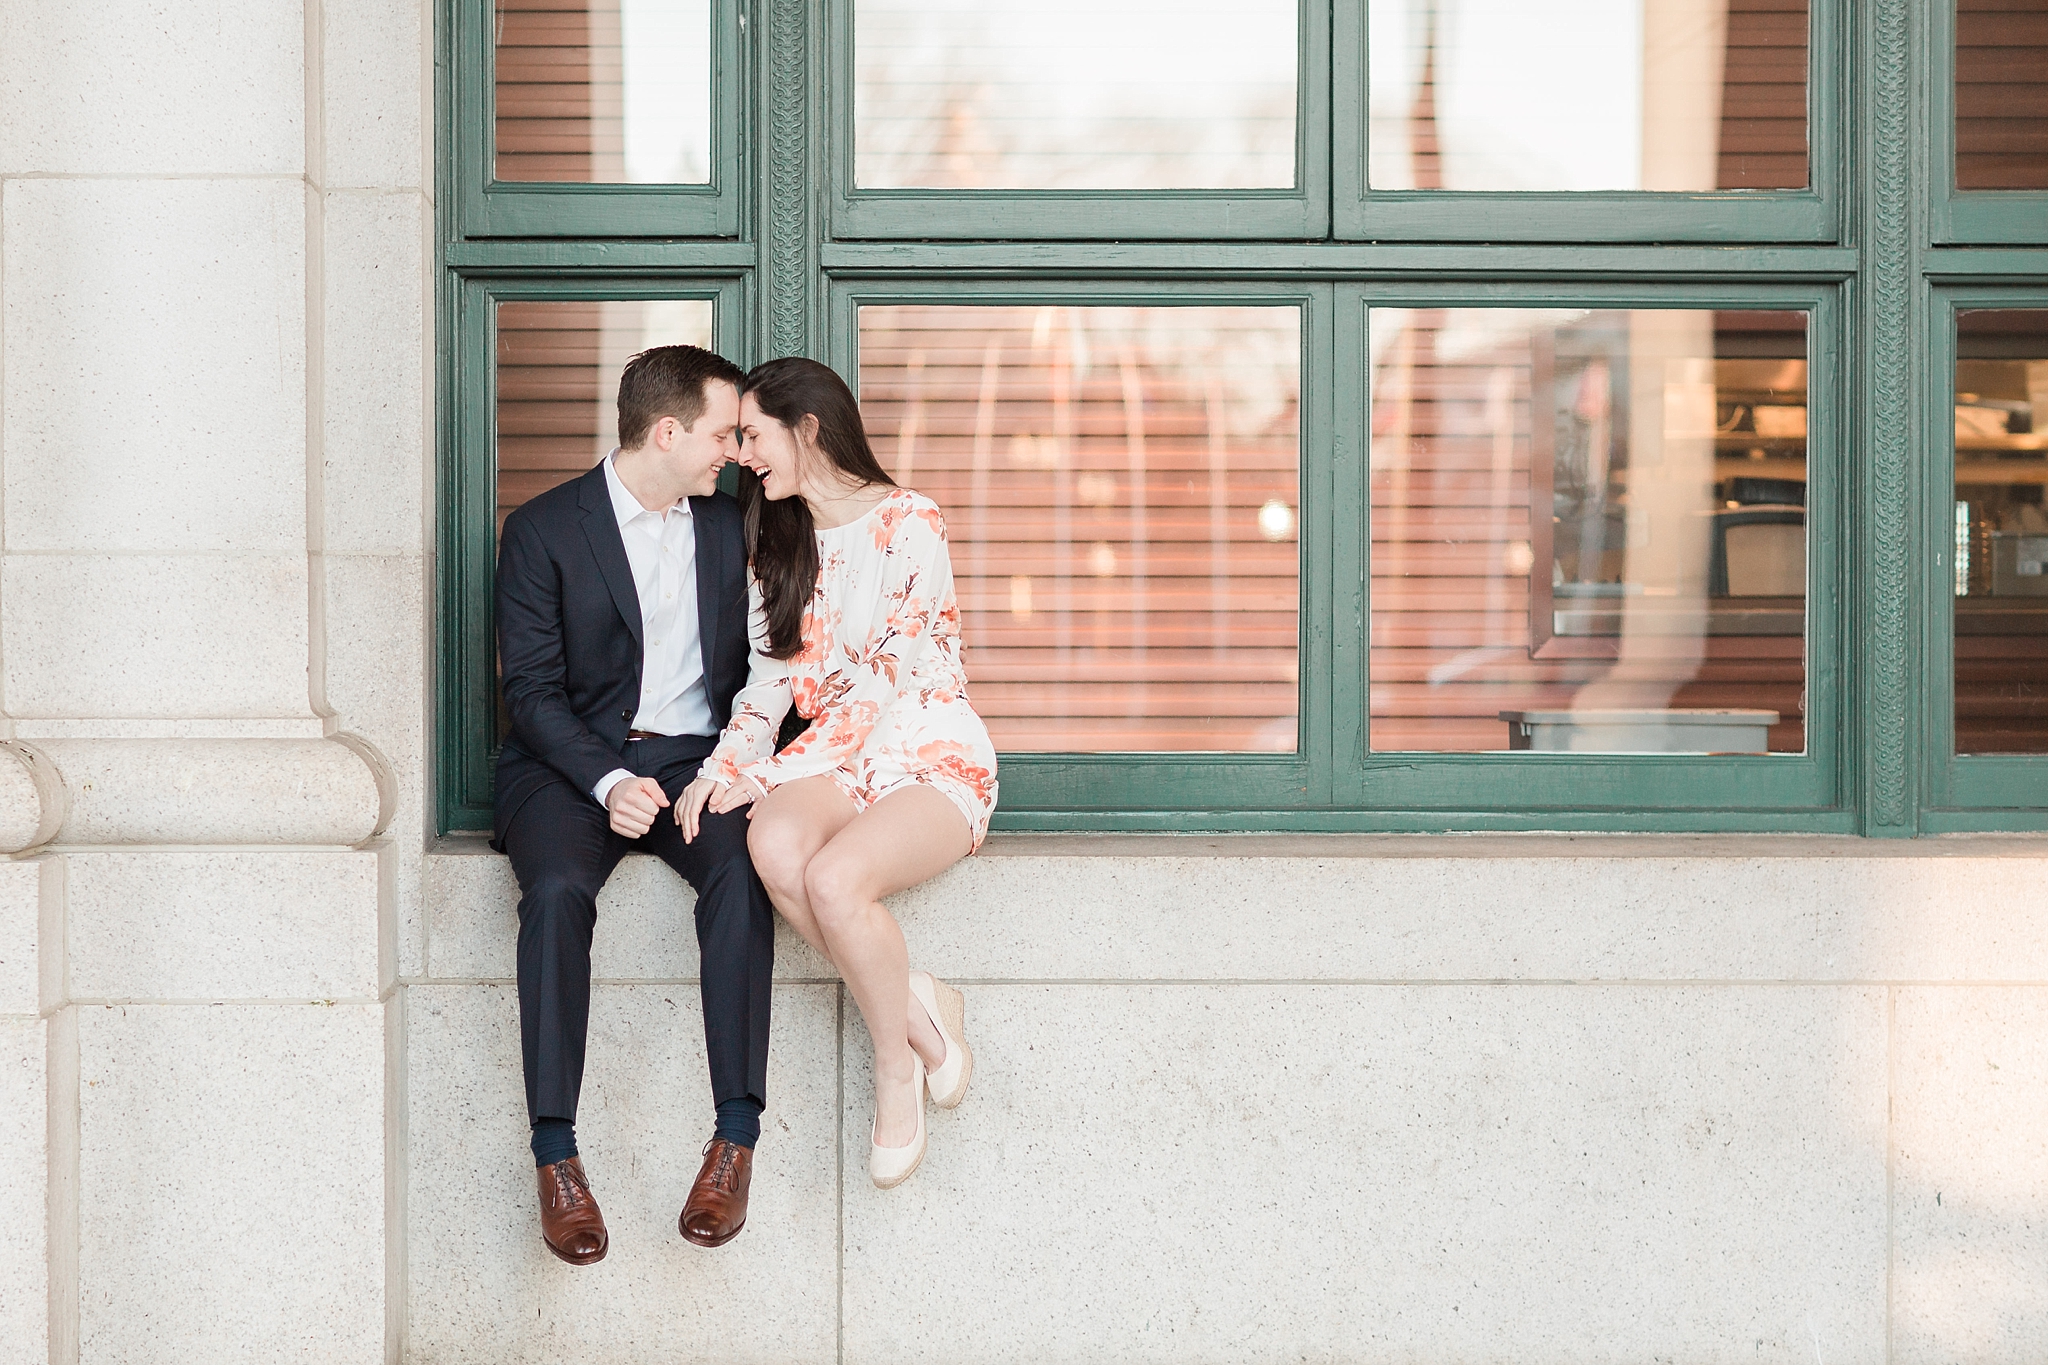 This romantic spring engagement session at Union Station in Washington, DC is photographed by fine art photographer, Alicia Lacey.